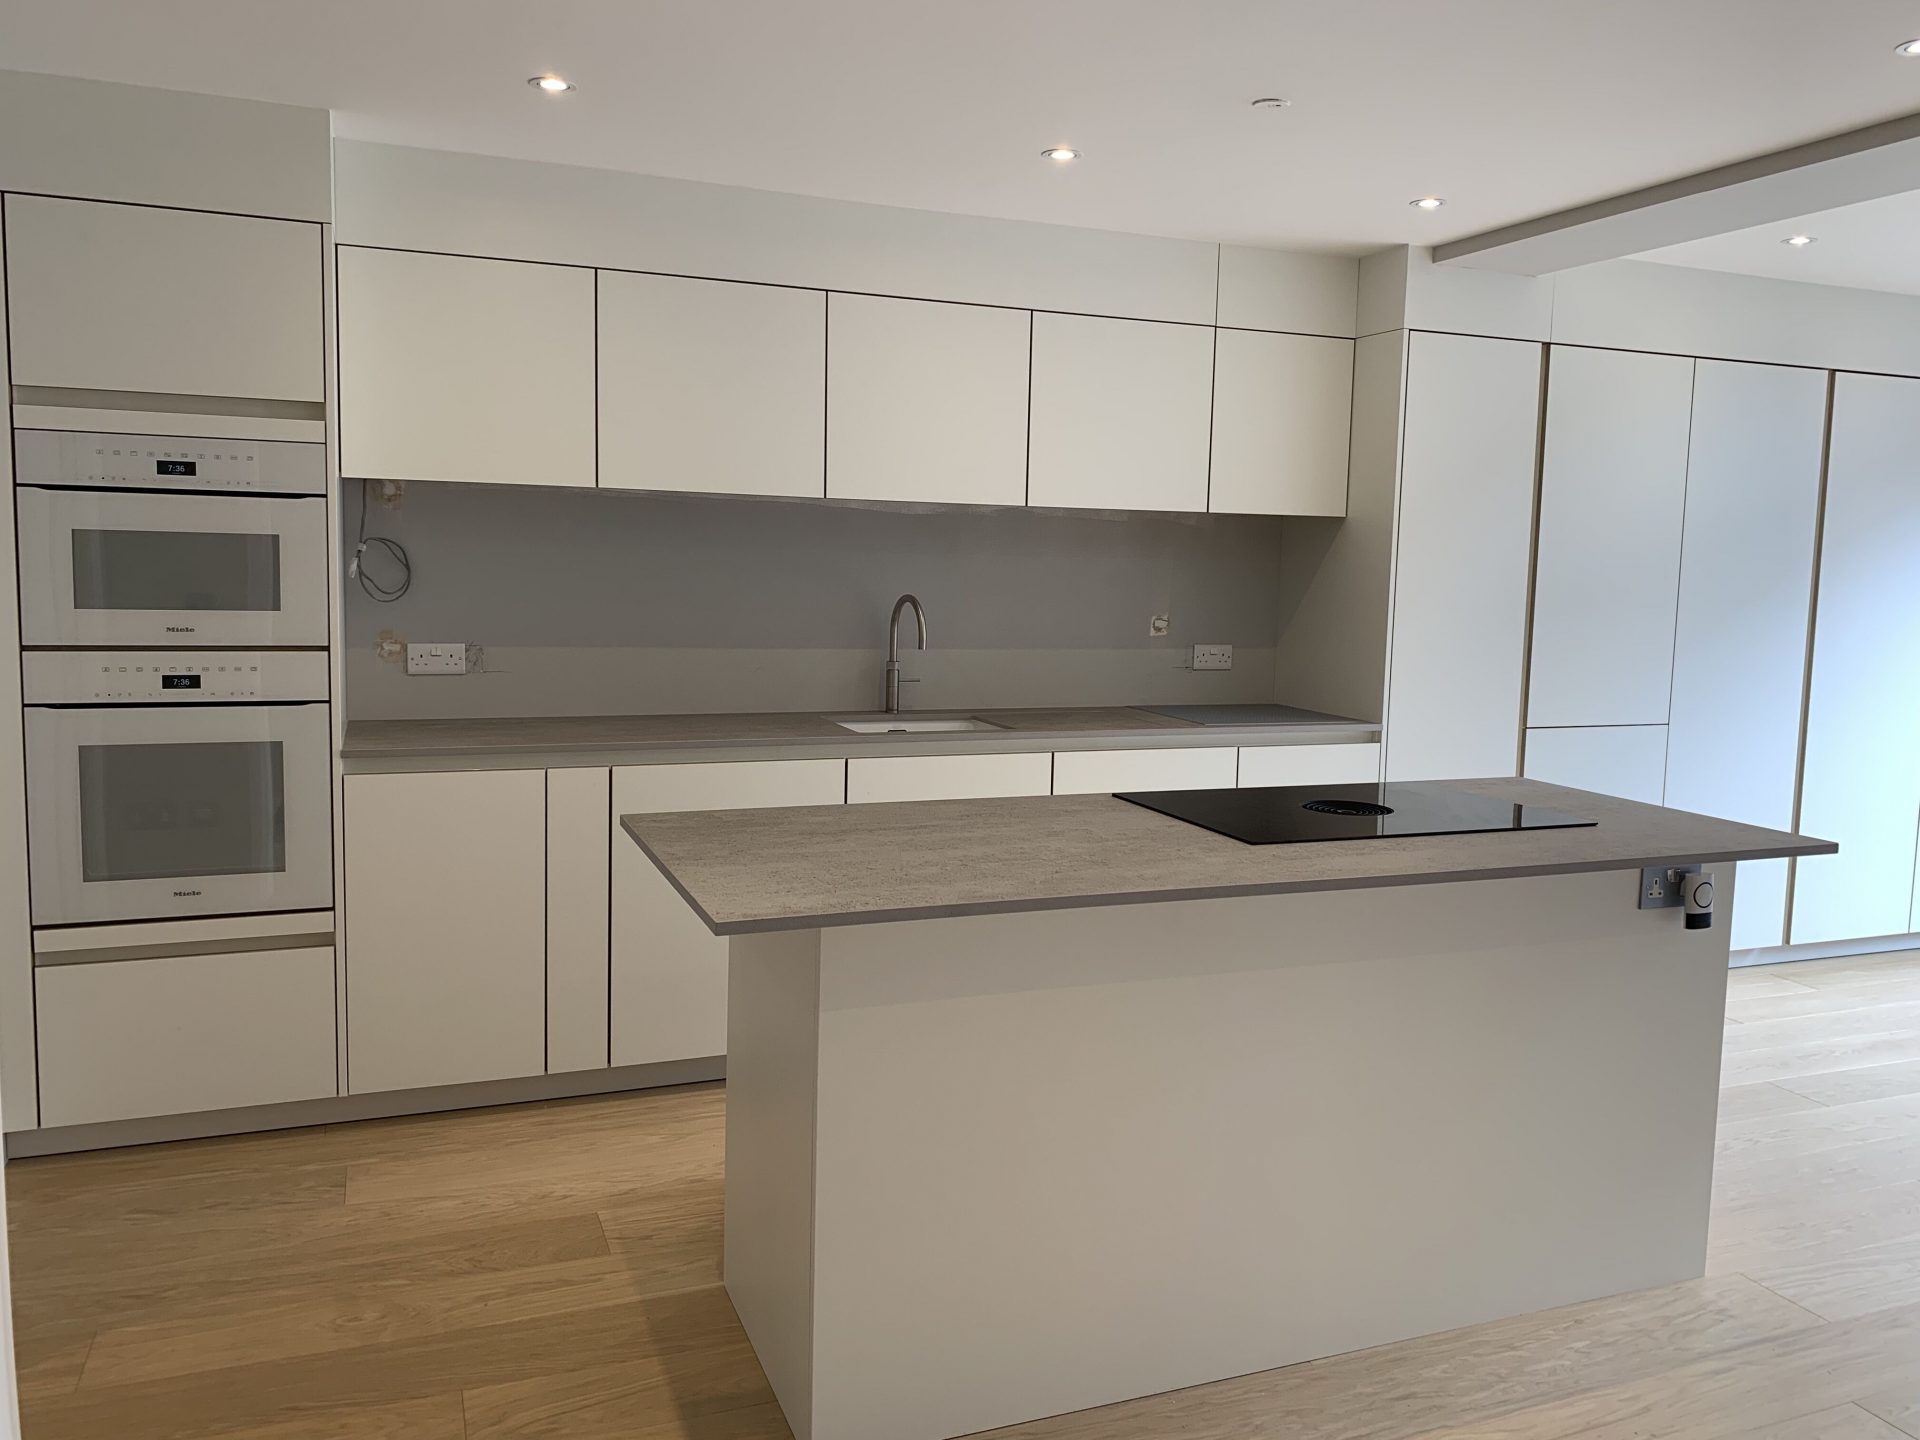 Modern Kitchen with White Appliances and Grey Splashback. High Gloss White Doors. TImber flooring throughout the dining room and kitchen space.